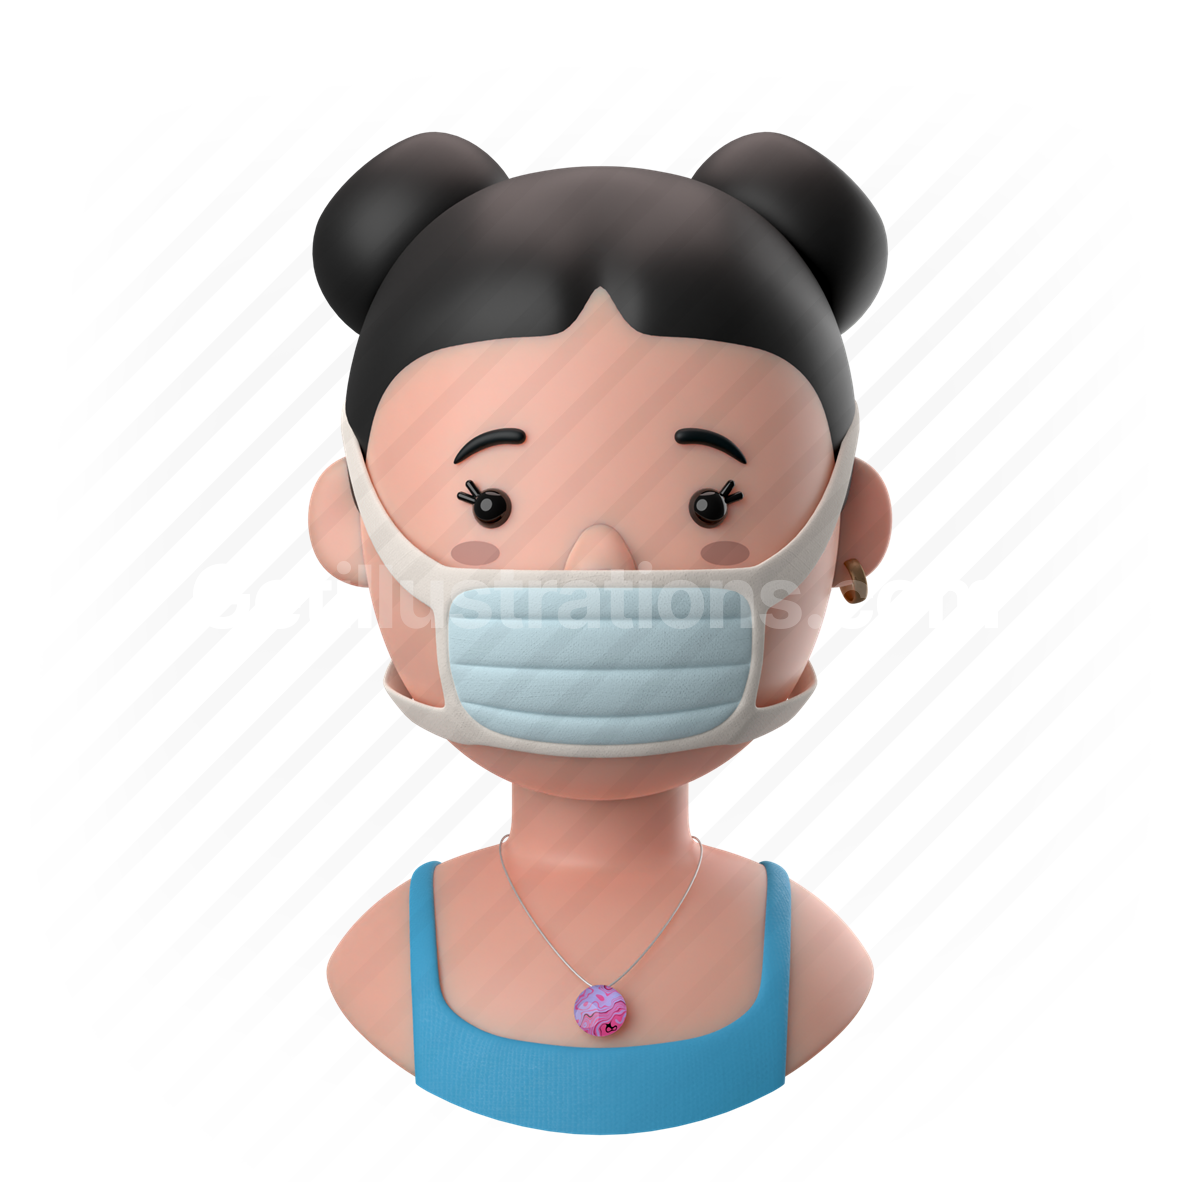 woman, female, person, people, face mask, mask, earring, necklace, buns